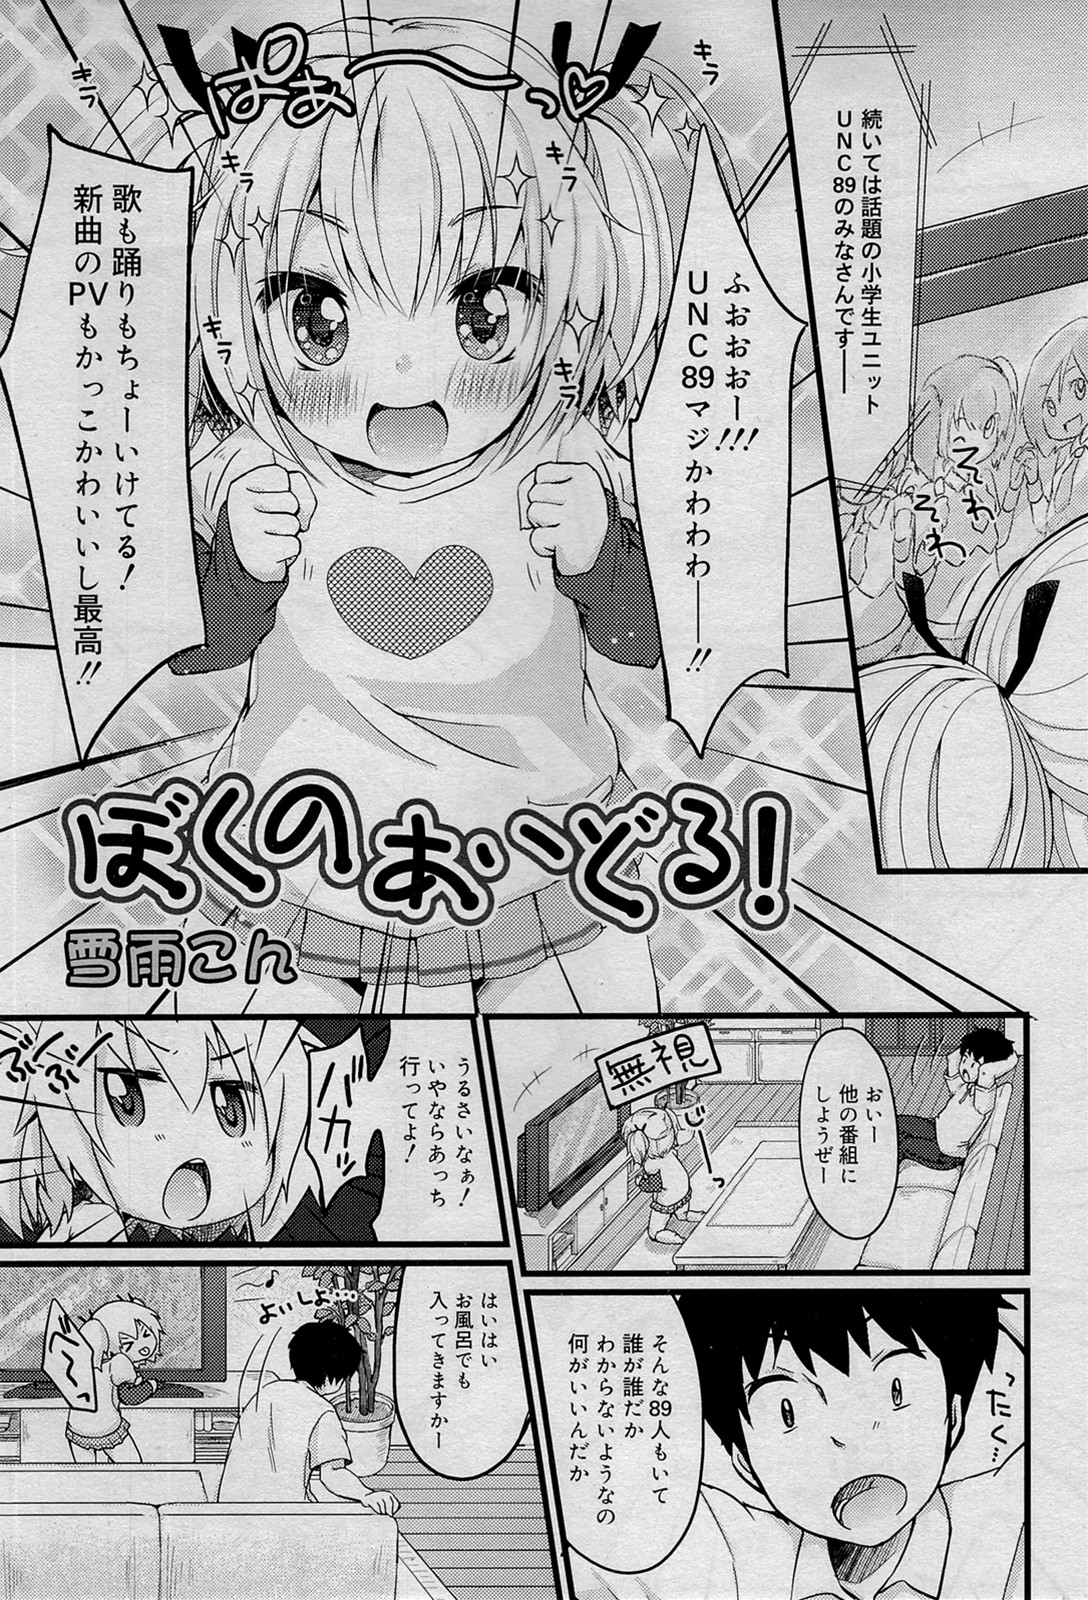 COMIC RiN 2012-01 page 39 full